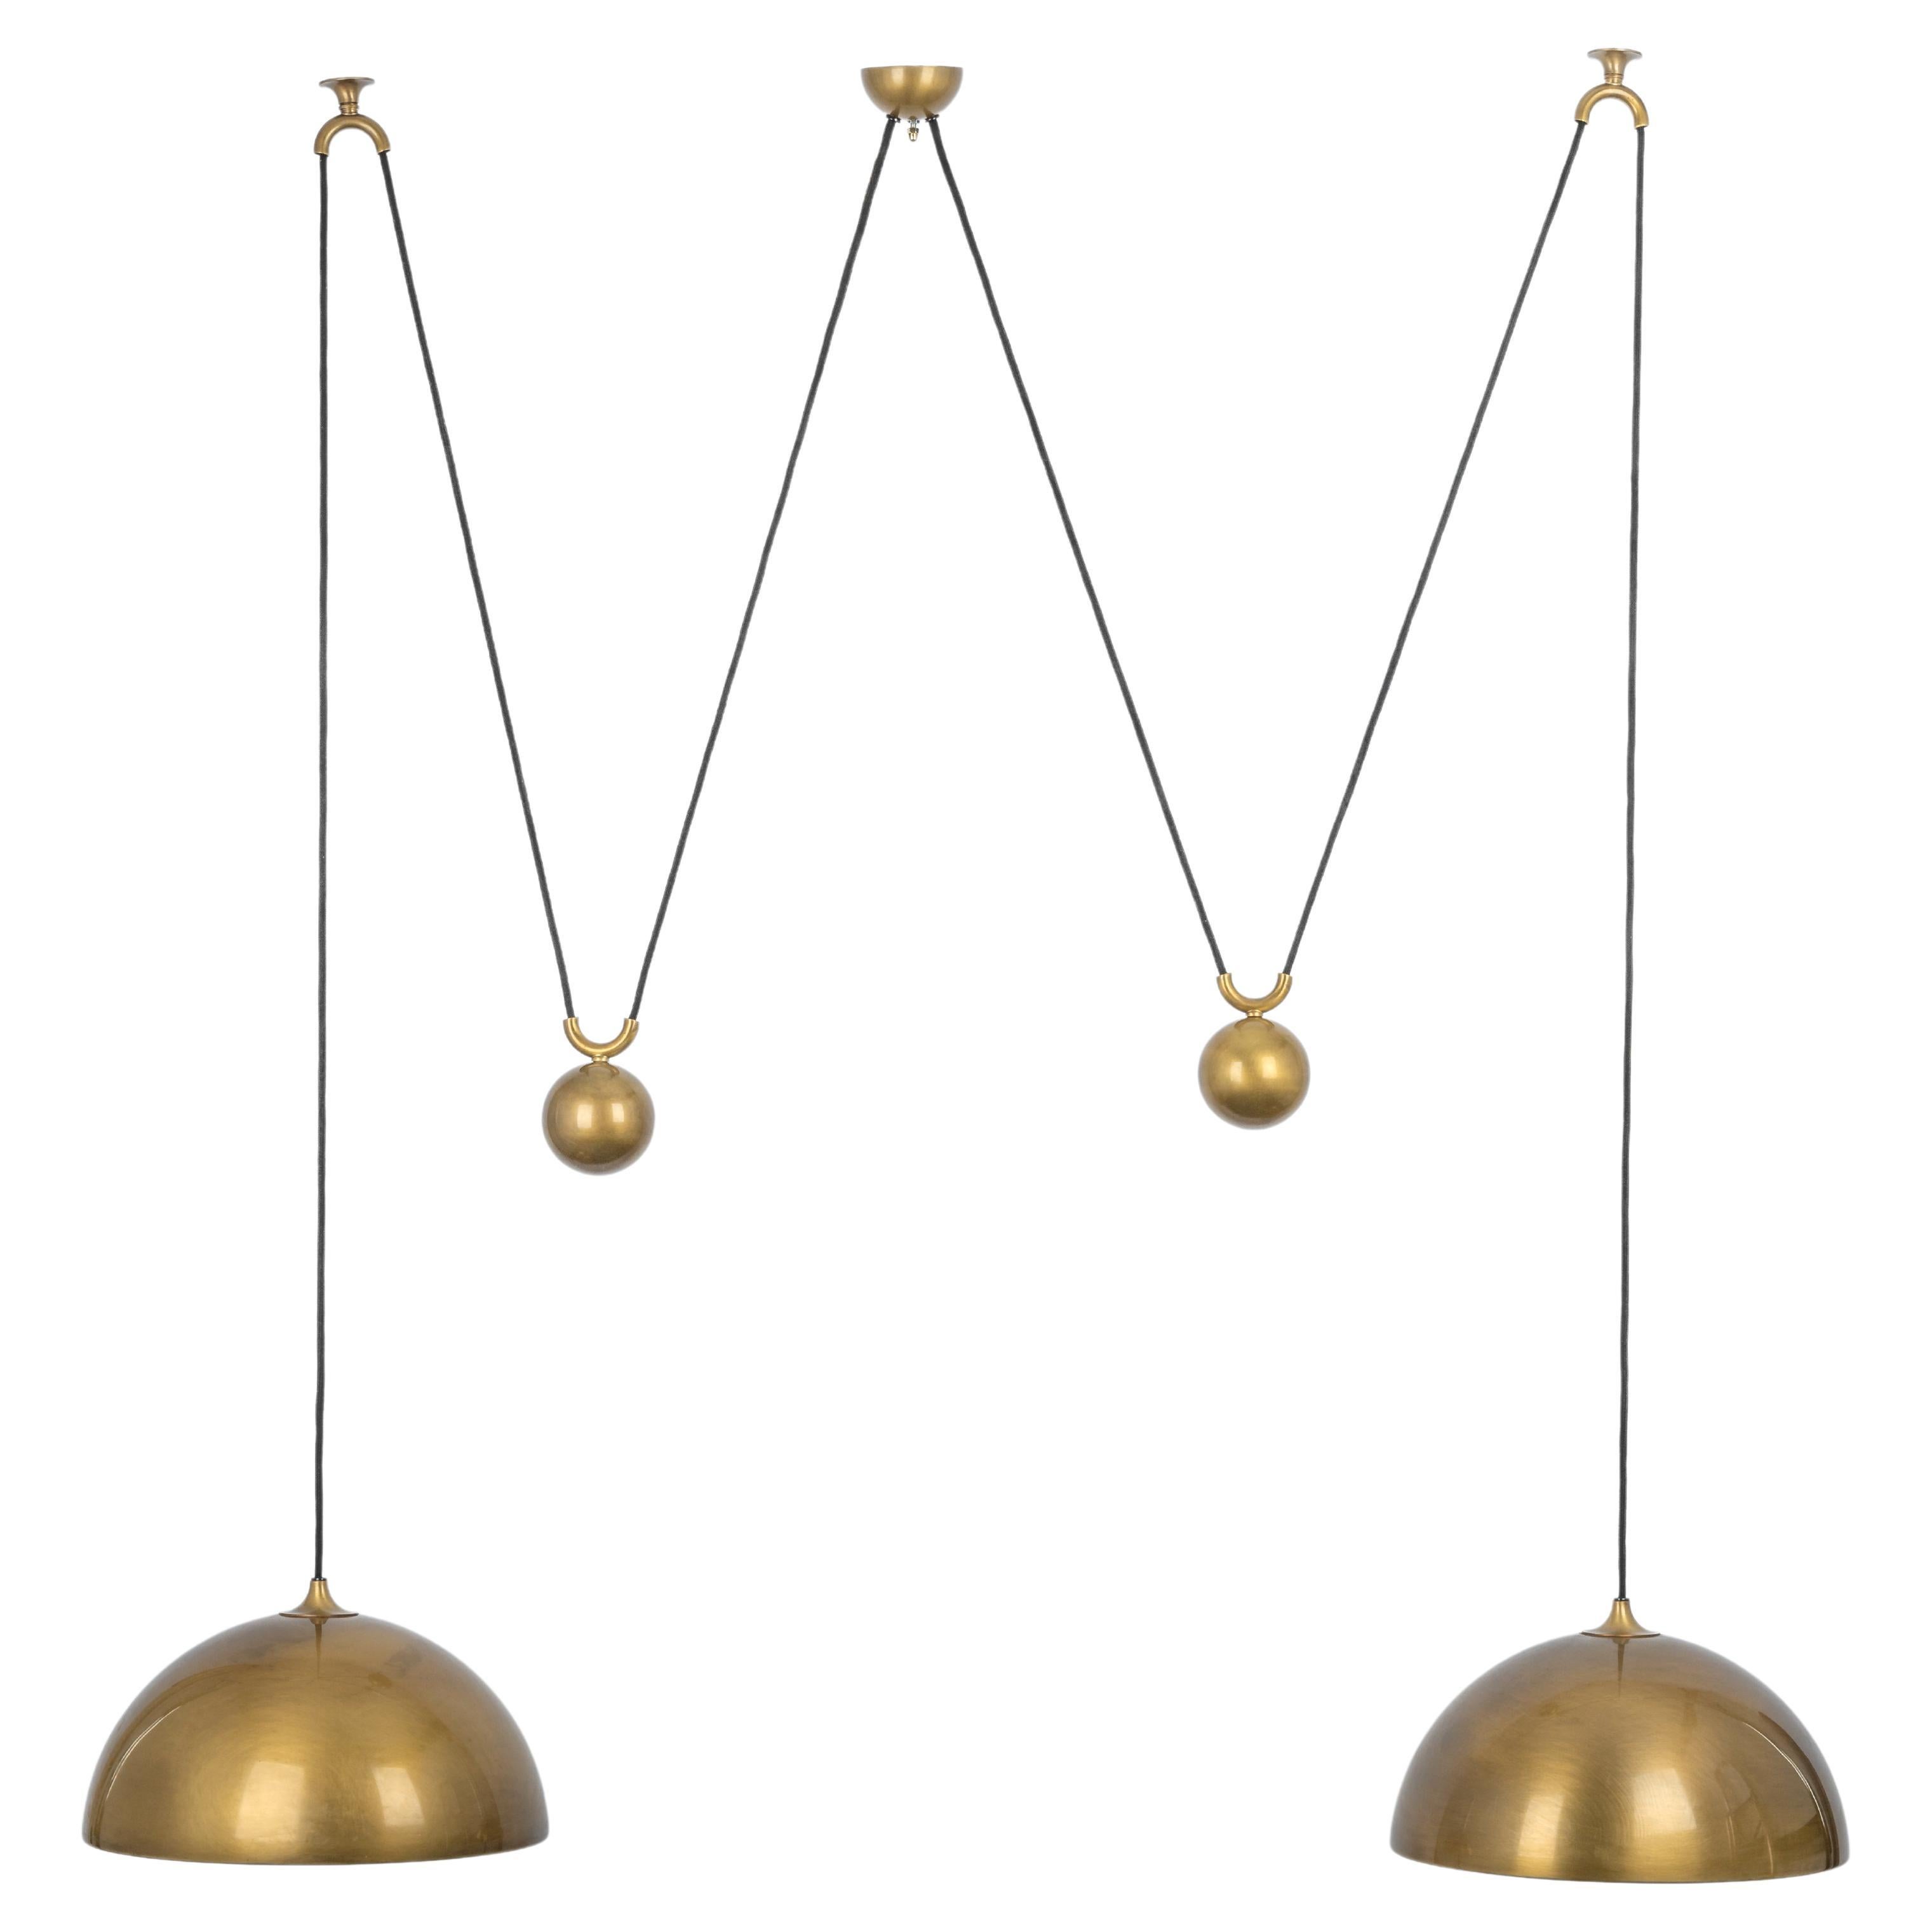 Stunning Double Brass Pendant with Adjustable Counter Weights by Florian Schulz